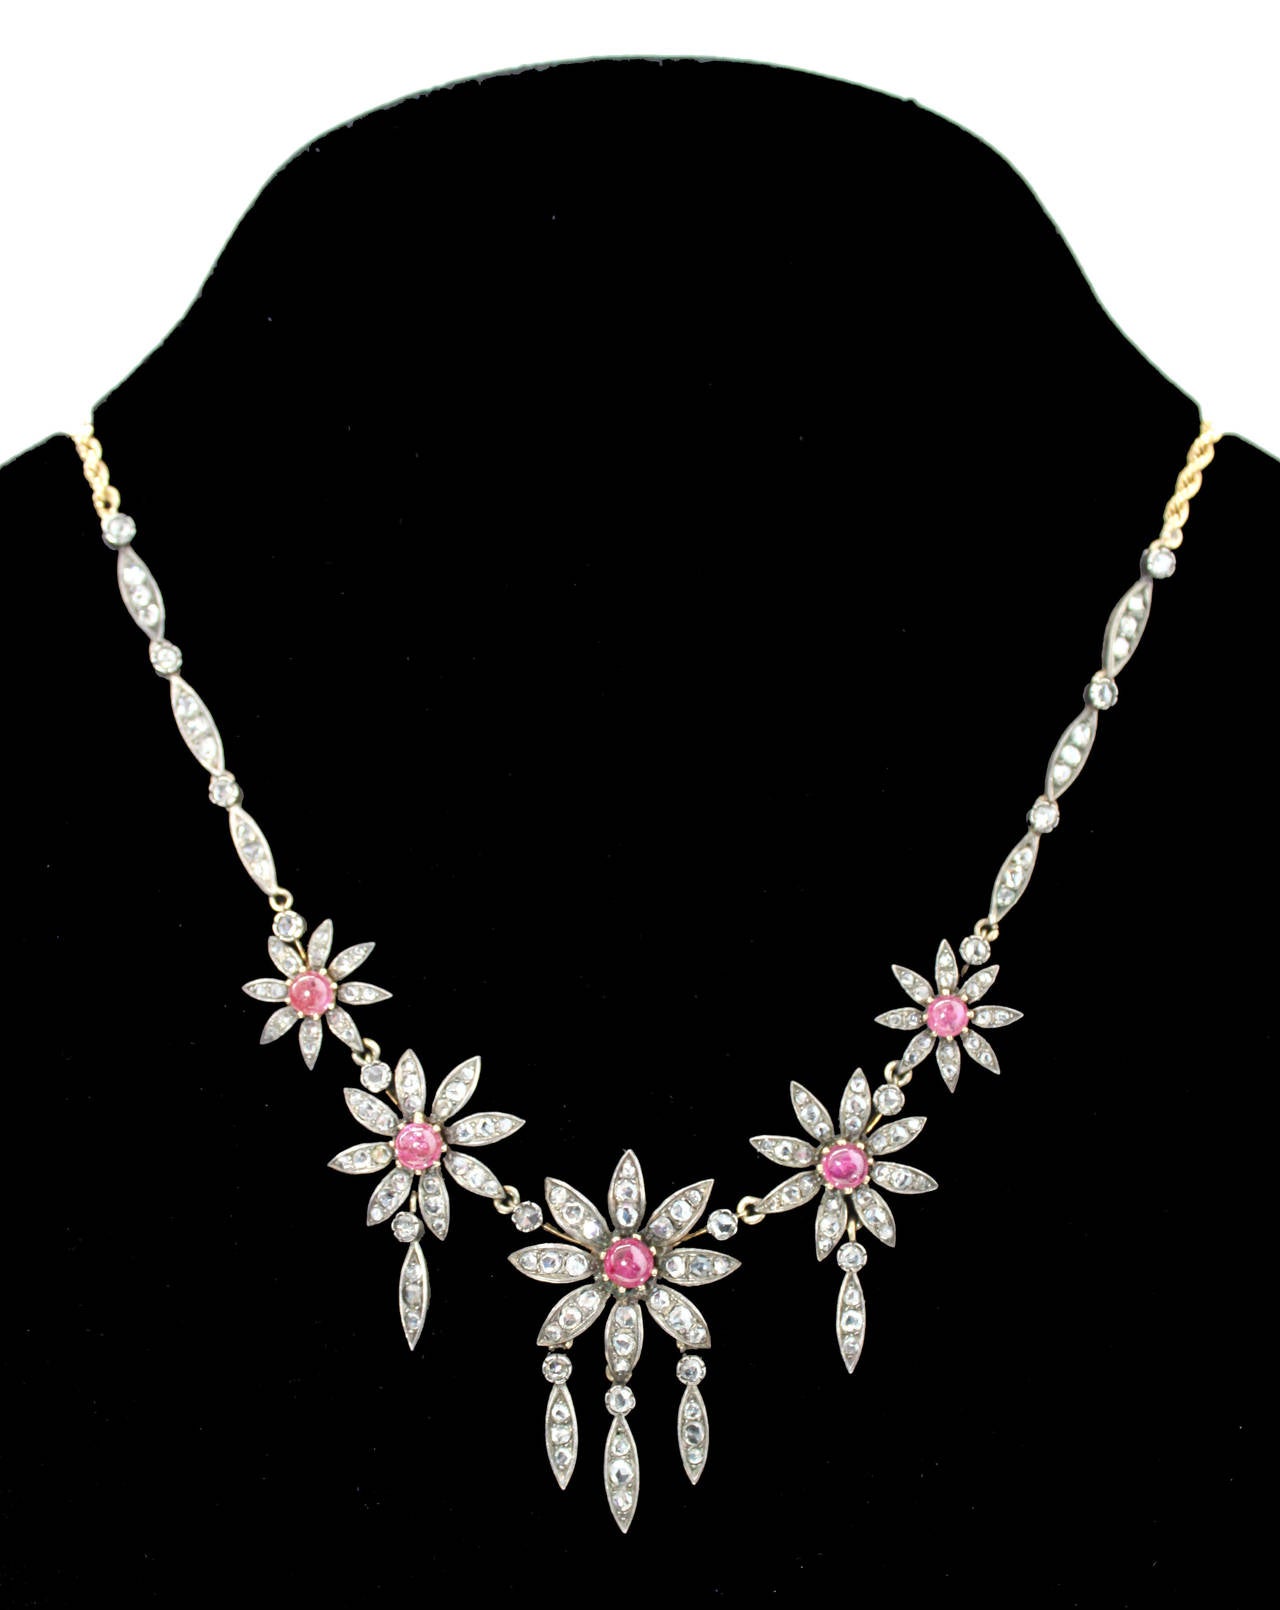 Victorian ruby and diamond necklace in silver and gold, 1890s. The 5 ruby cabochons are natural Burma rubies and display a fine colour and crystal. The weight of the rubies is circa 3-4 carats. The diamonds are rosecut diamonds and weigh circa 5